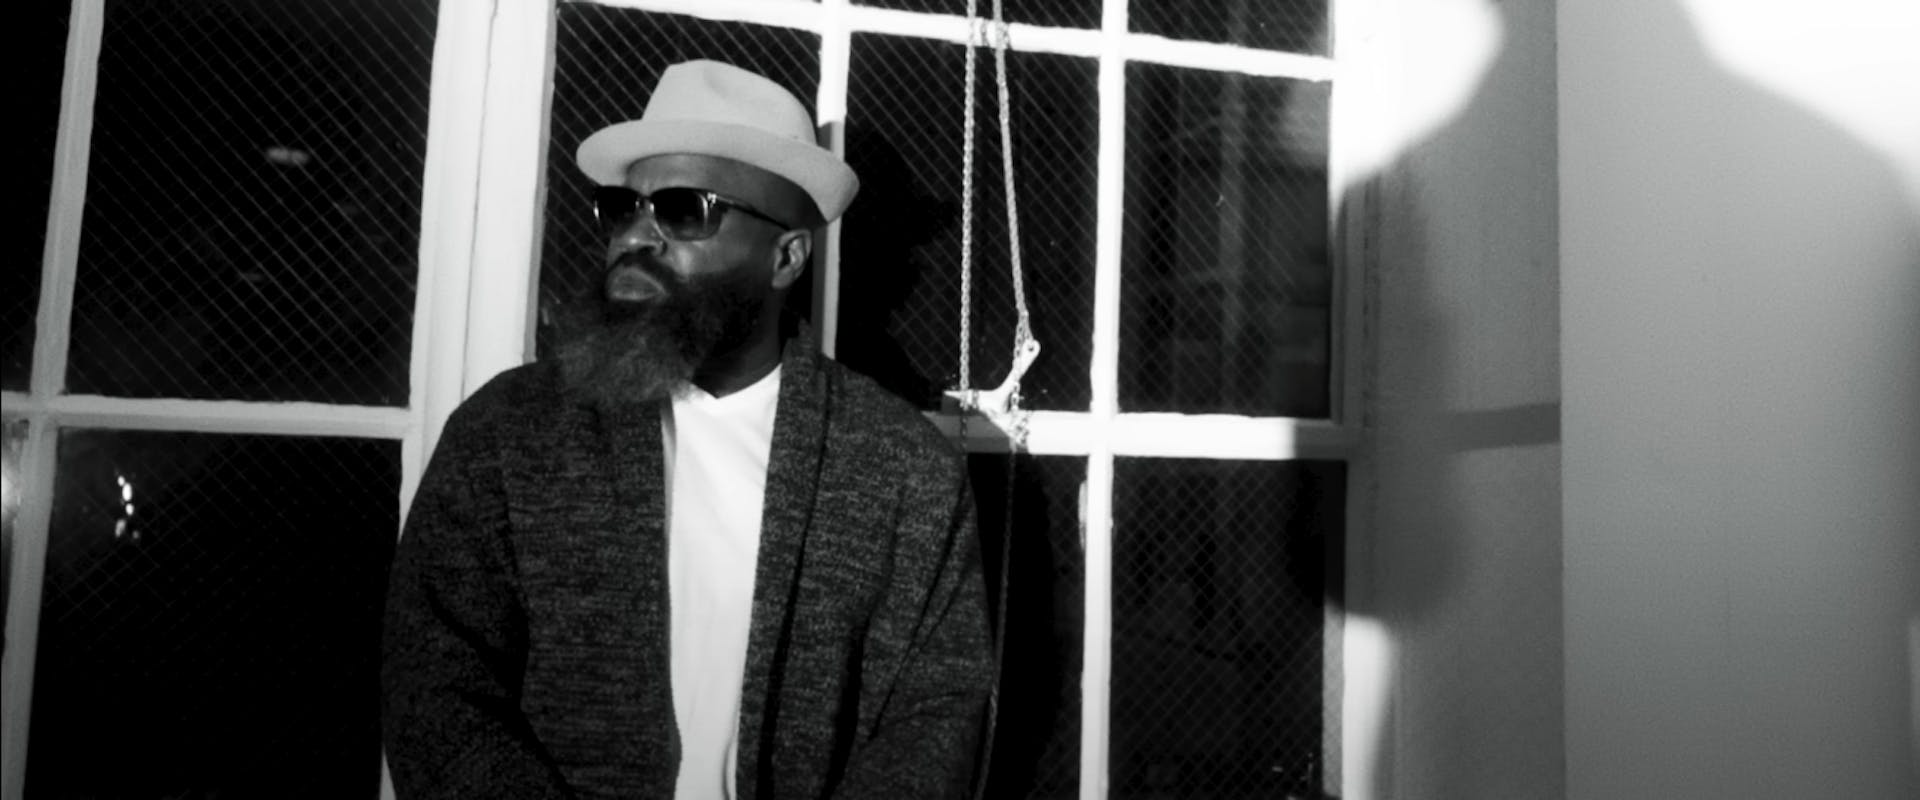 Black Thought in the music video for "Belize"